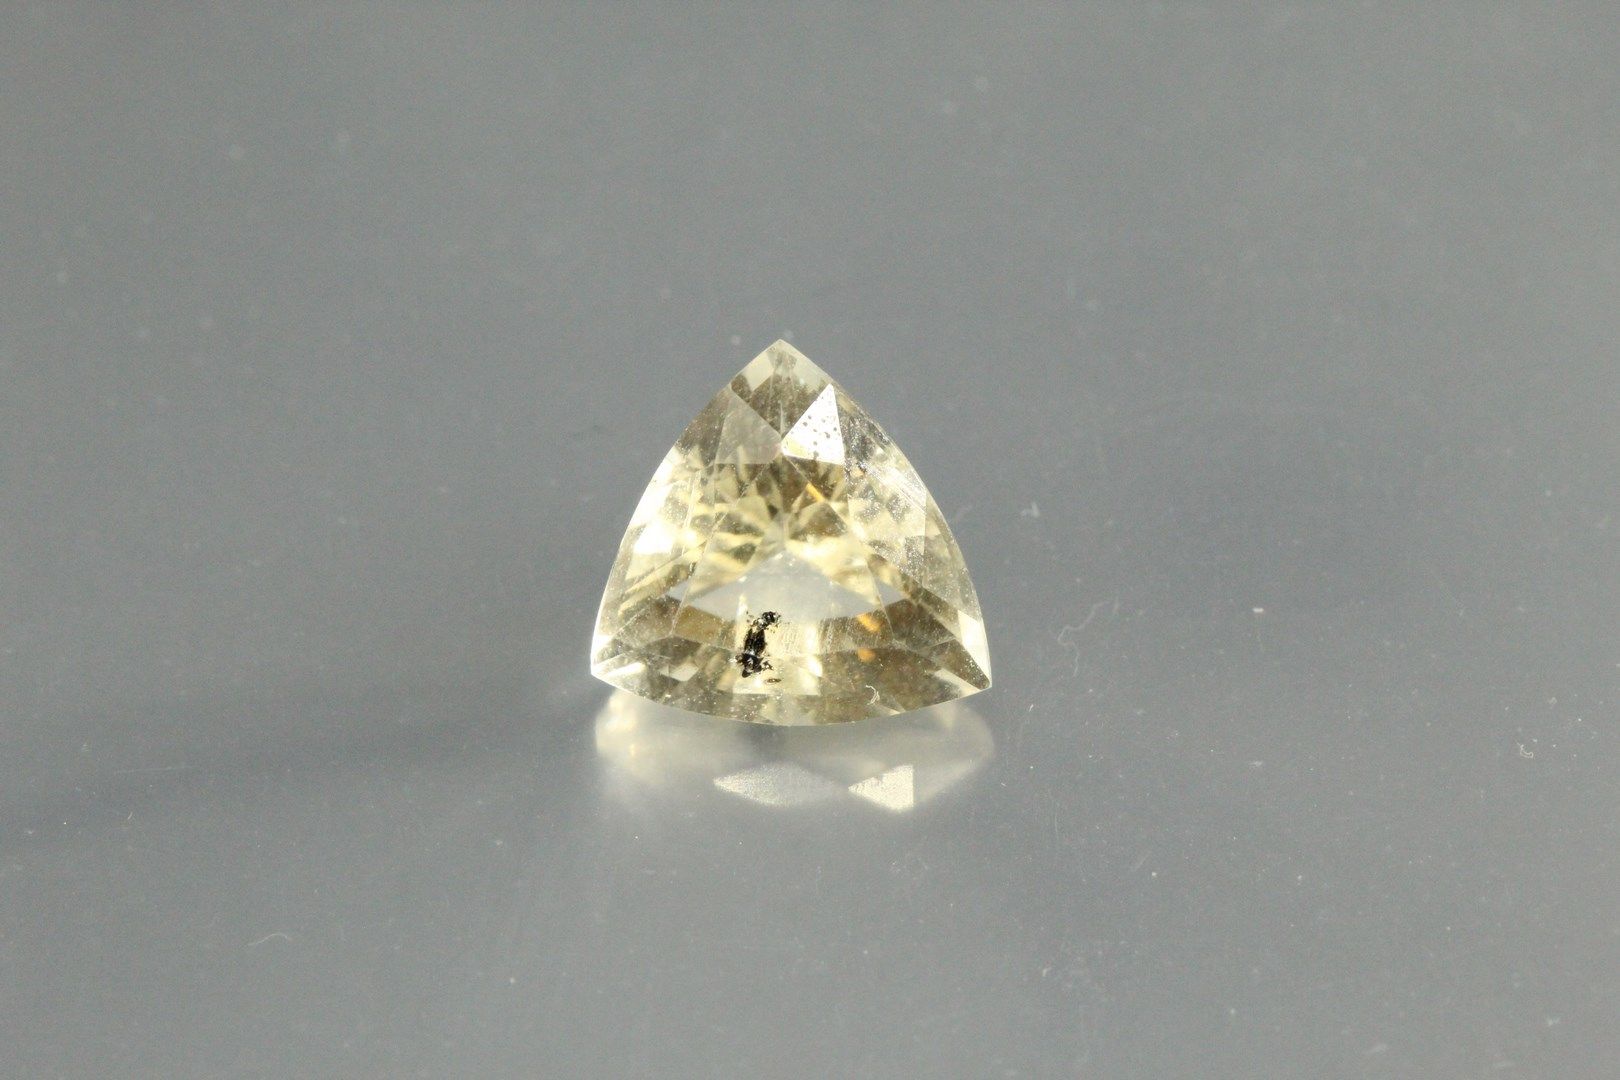 Null Yellow trillion scapolite on paper.

Africa.

Weight : 2, 40 cts. 

Inclusi&hellip;